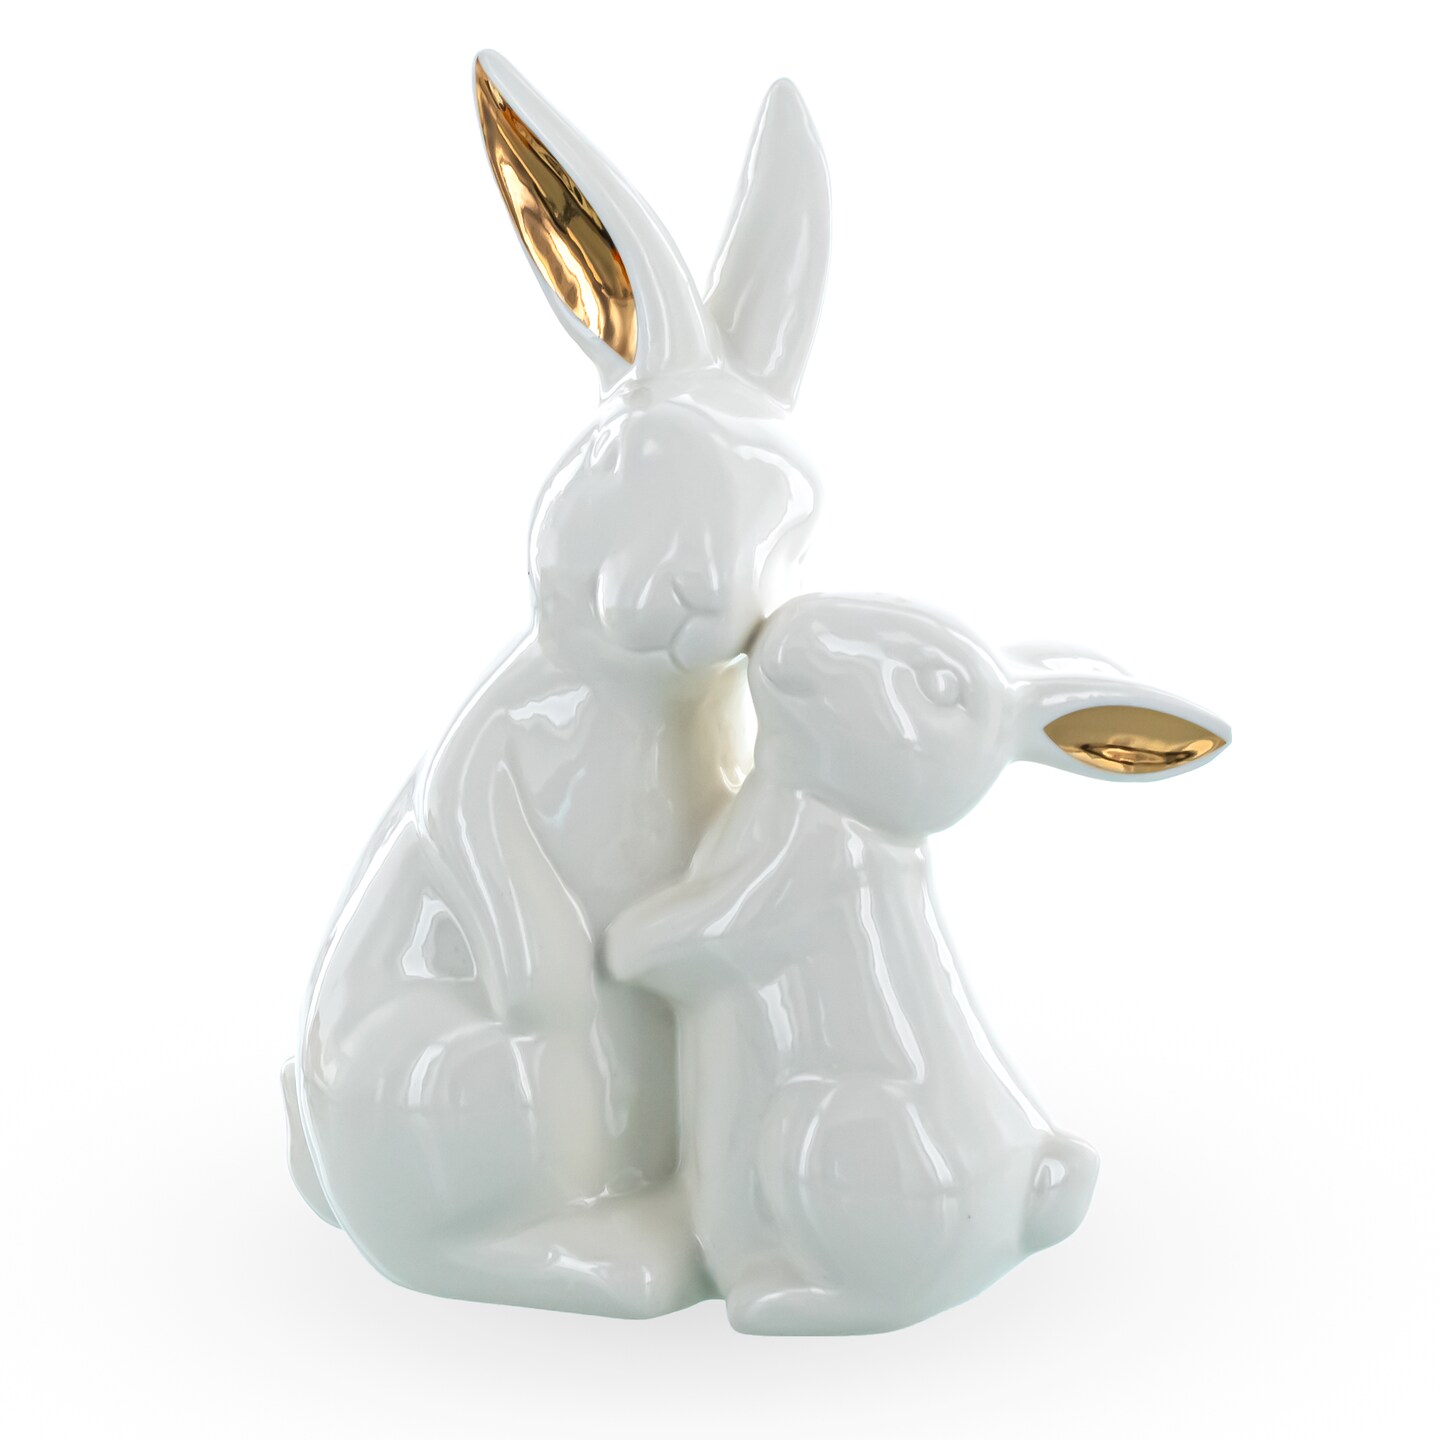 Ceramic Easter Figurine of Mother Bunny with Her Little One